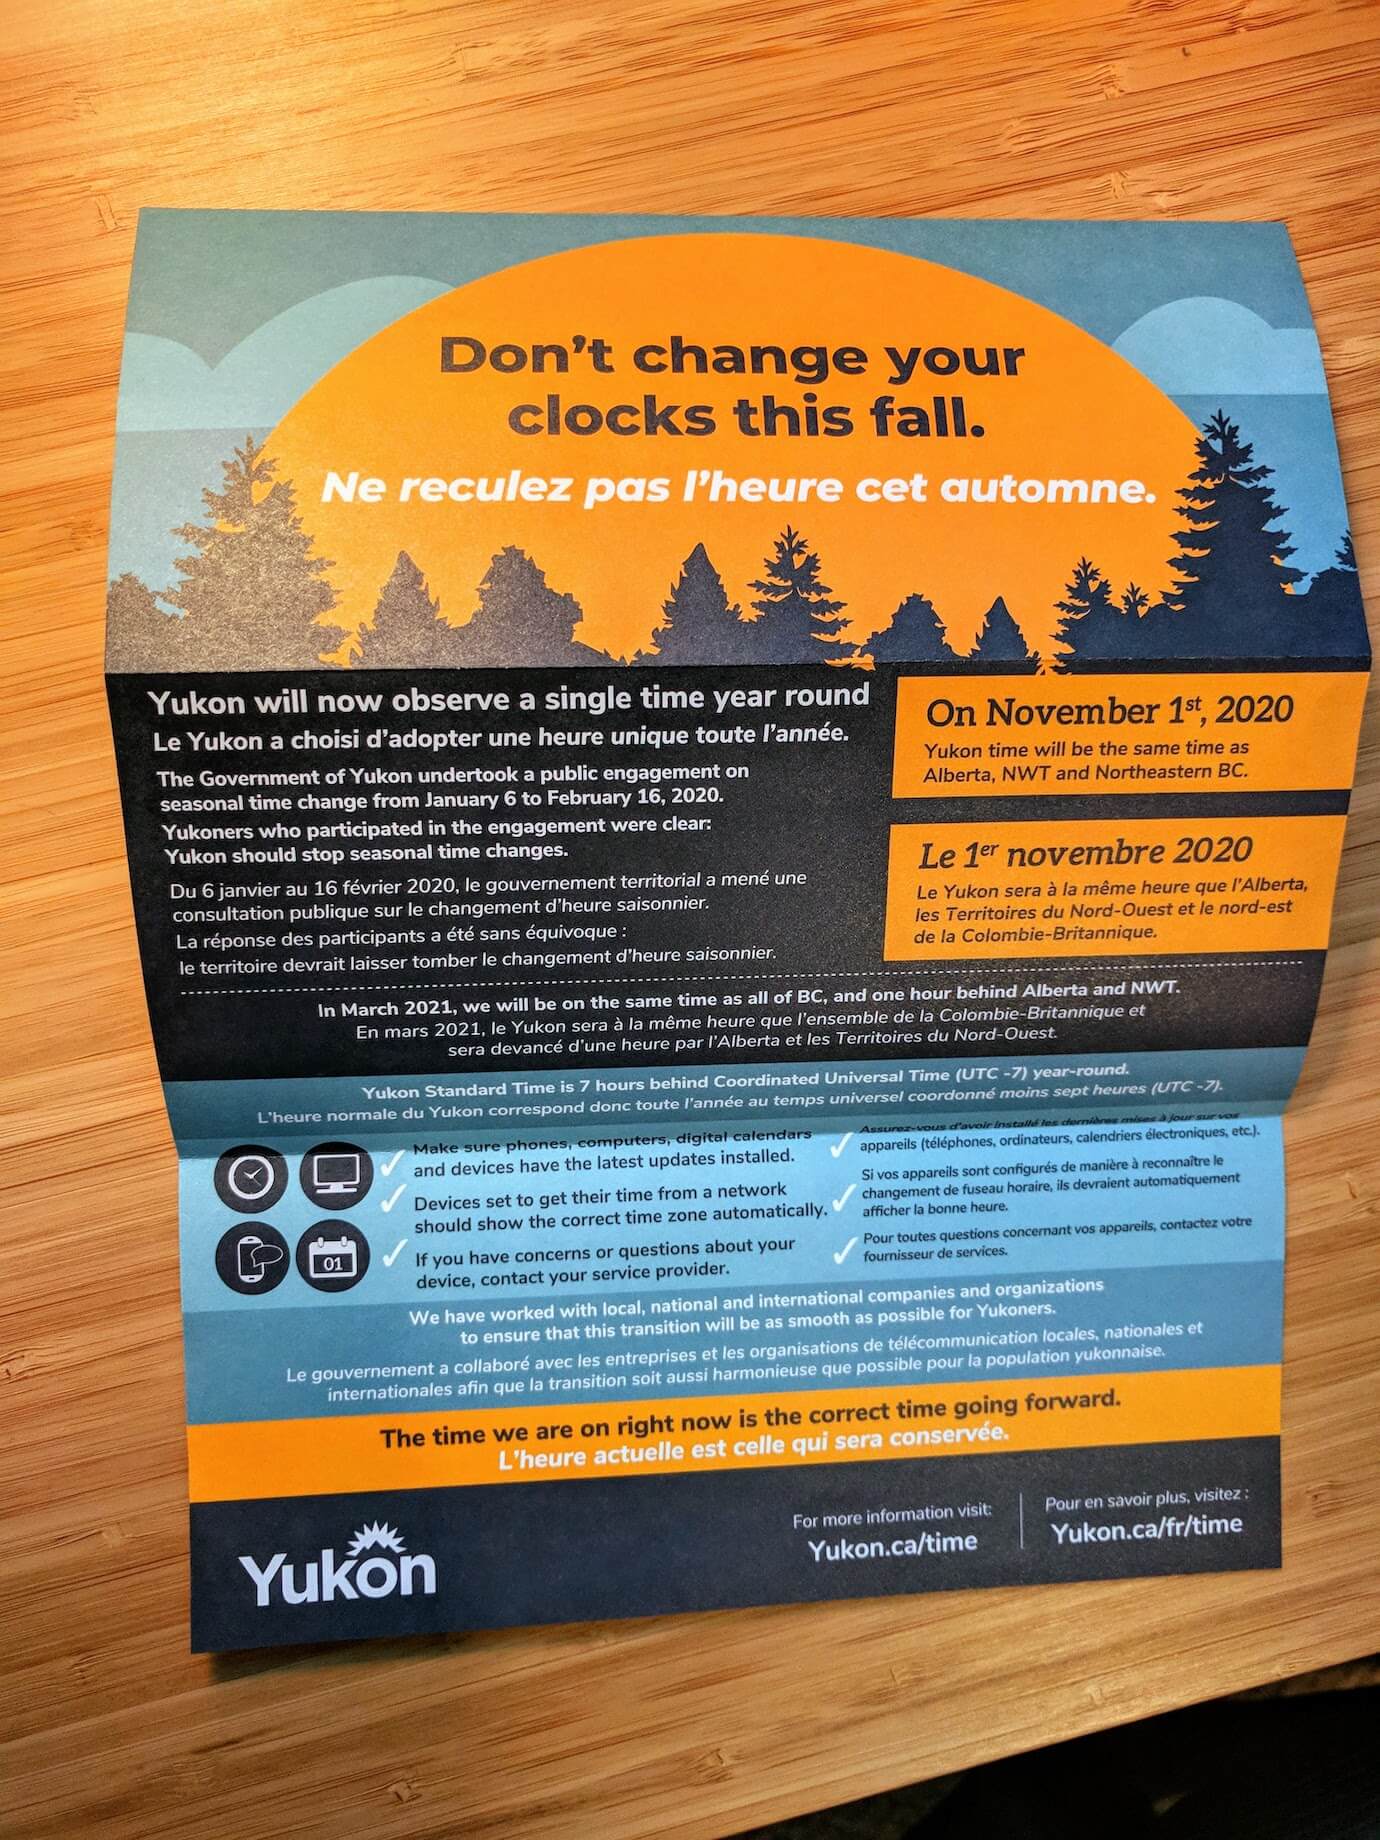 A flyer left in mailboxes by the Yukon government, saying: “Don’t change your clocks this fall. Ne reculez pas l’heure cet automne.” with reminders that Yukon will now observe a single time year round.